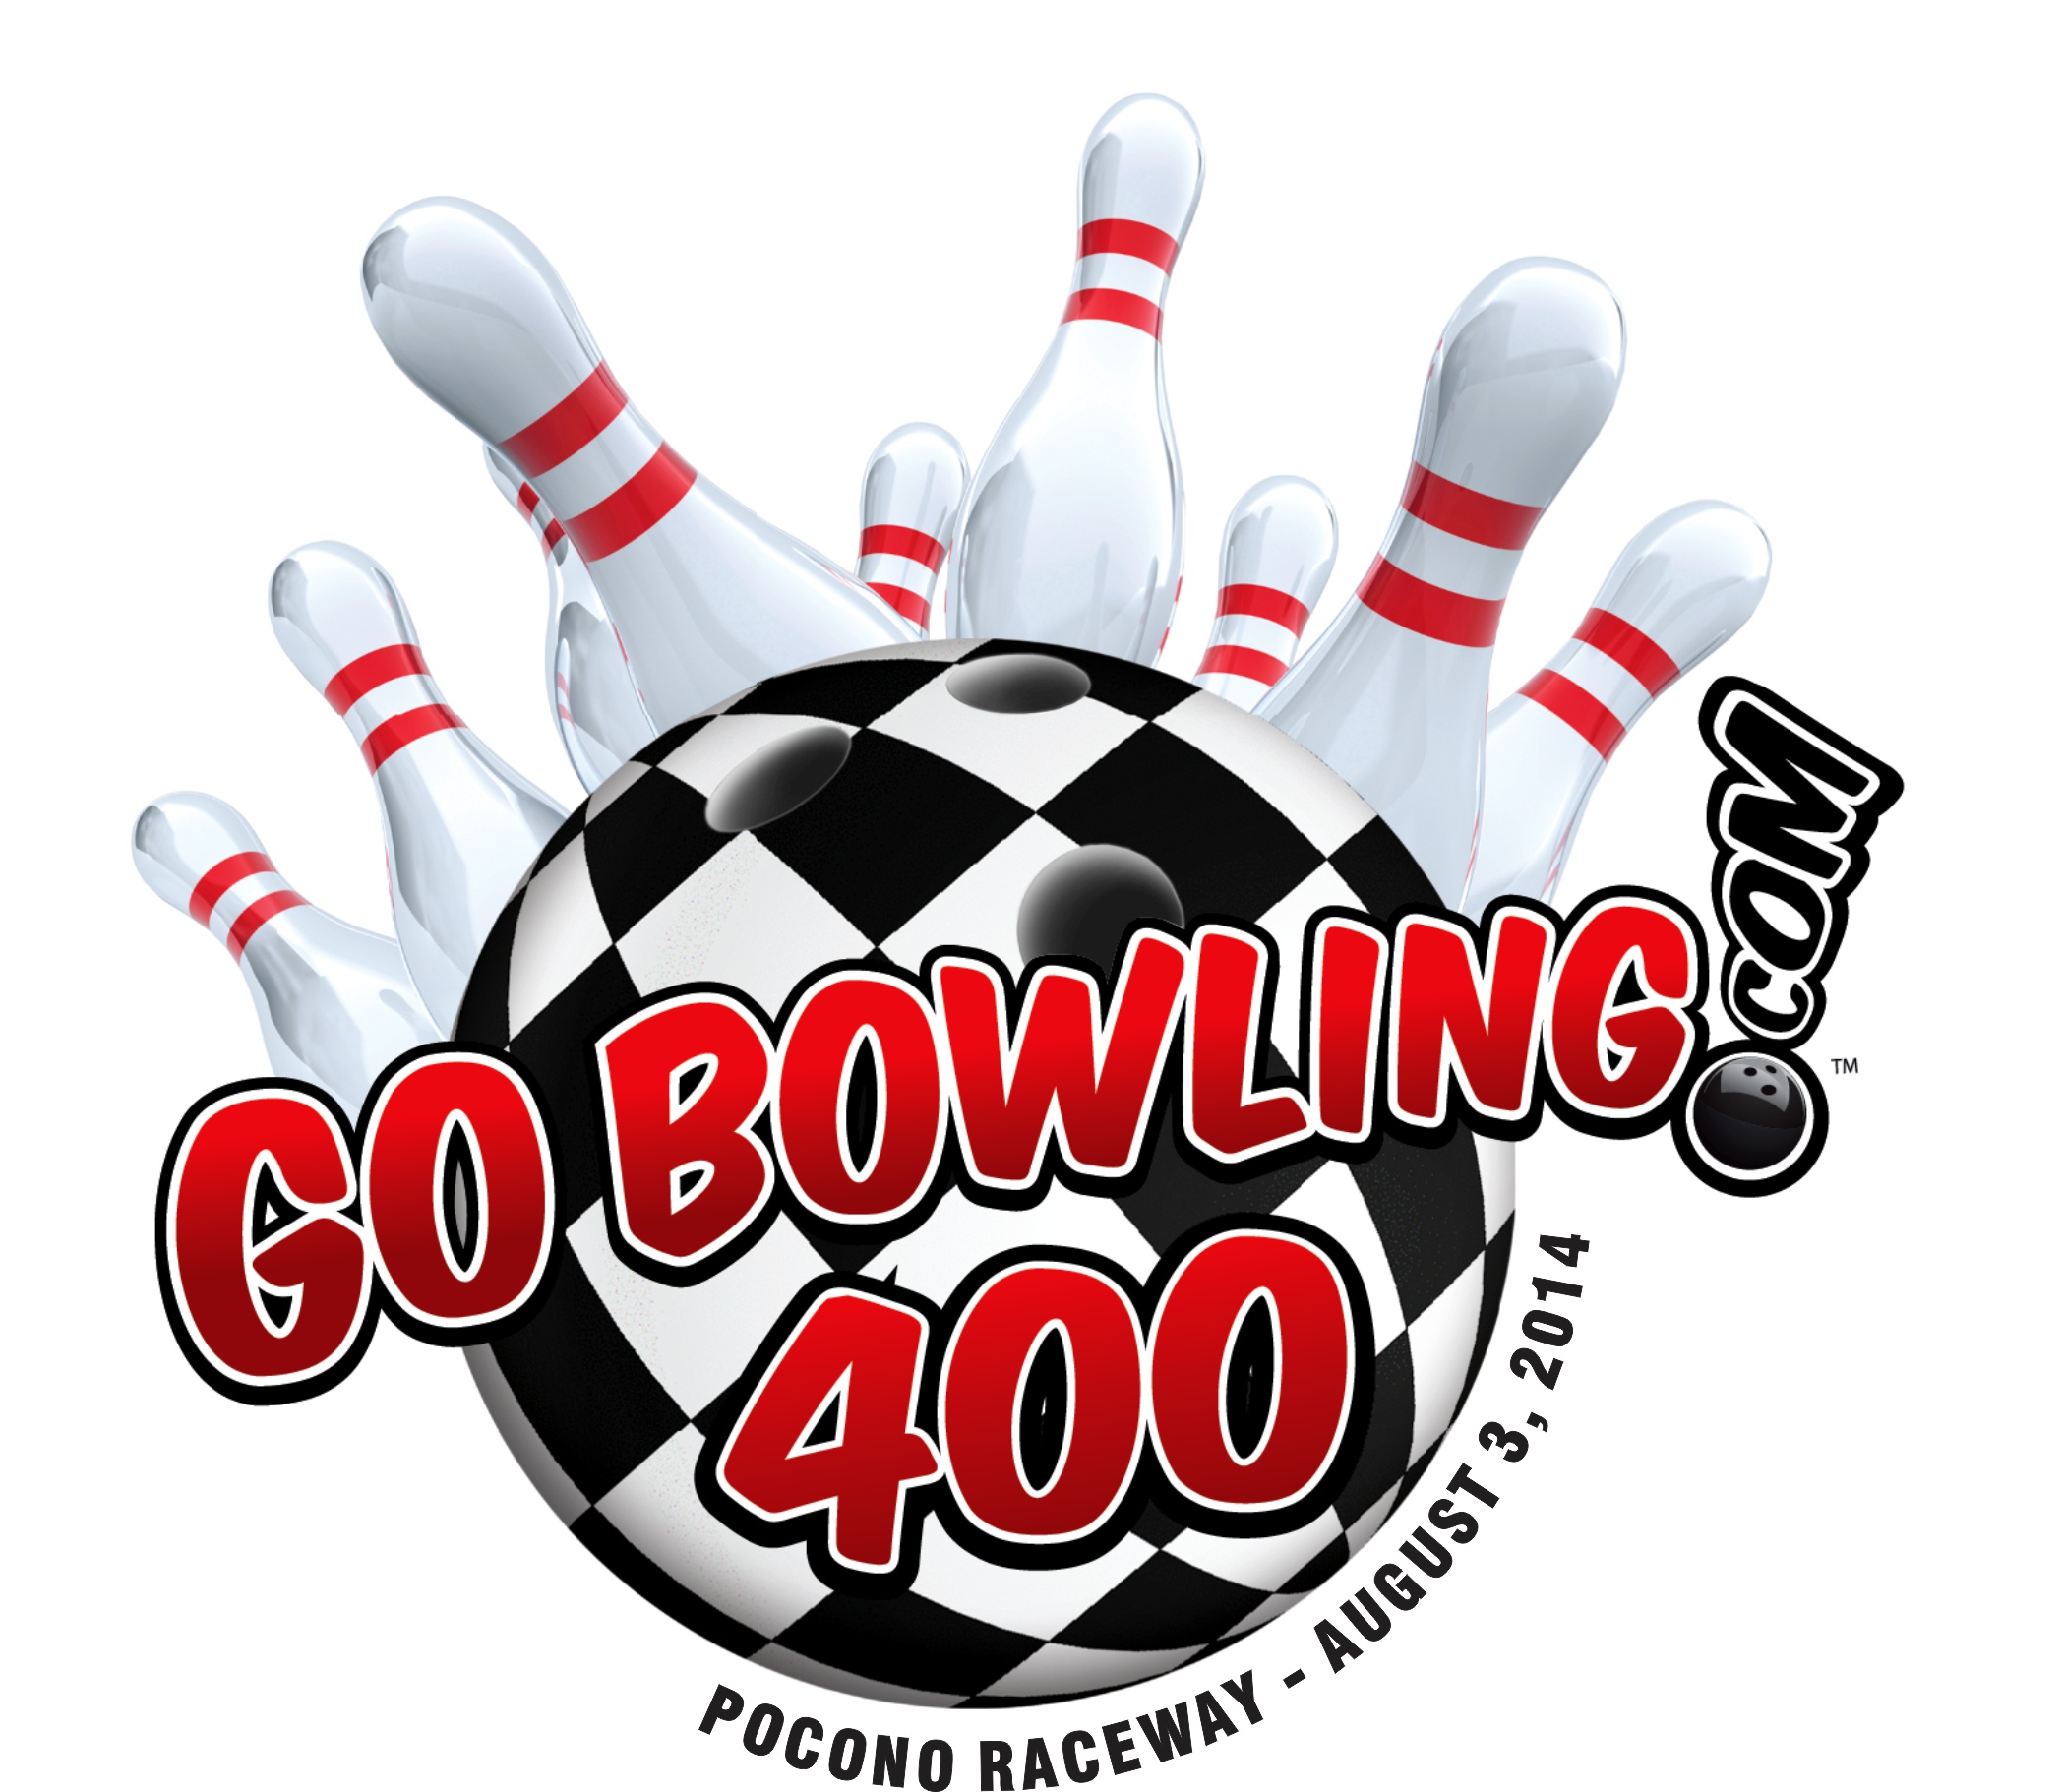 NASCAR at Pococo: Starting lineup, green flag and tv info for GoBowling.com 400